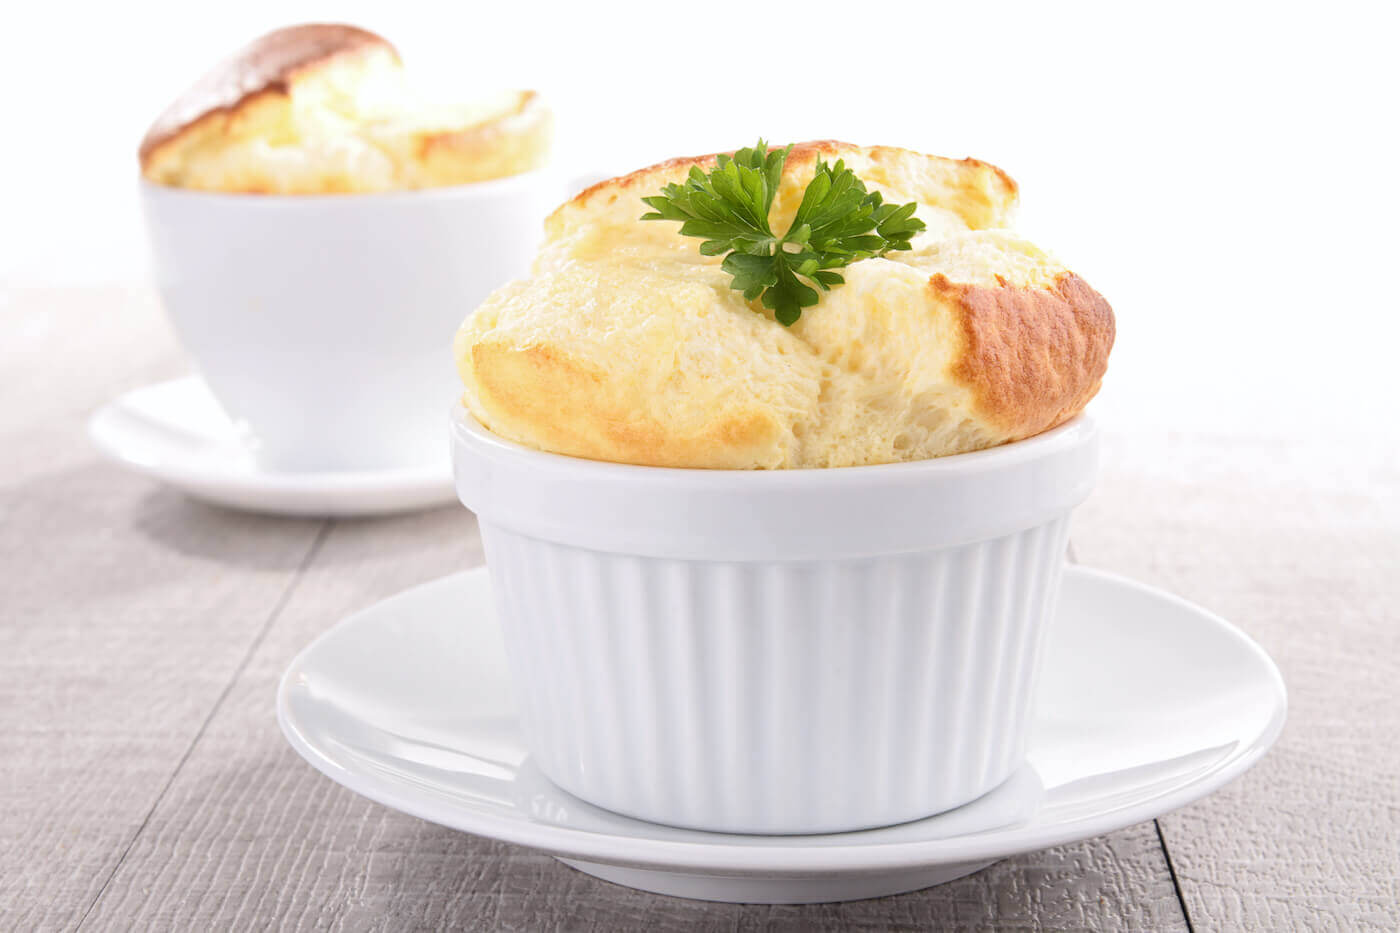 A closeup of a cheese soufflé in a white ramekin on a white saucer, with a second soufflé in the background